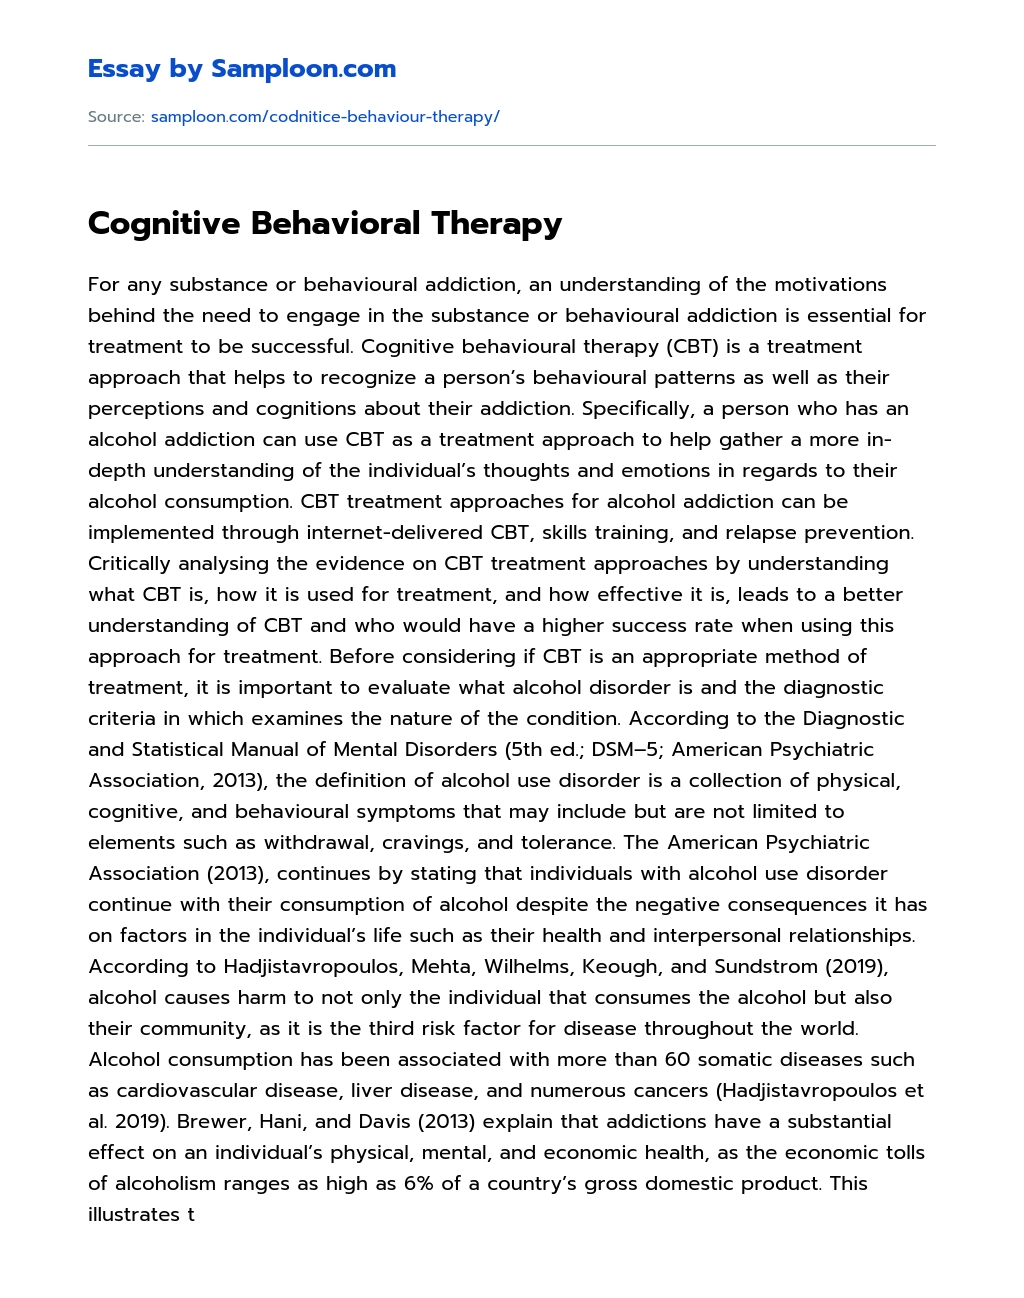 Cognitive Behavioral Therapy essay